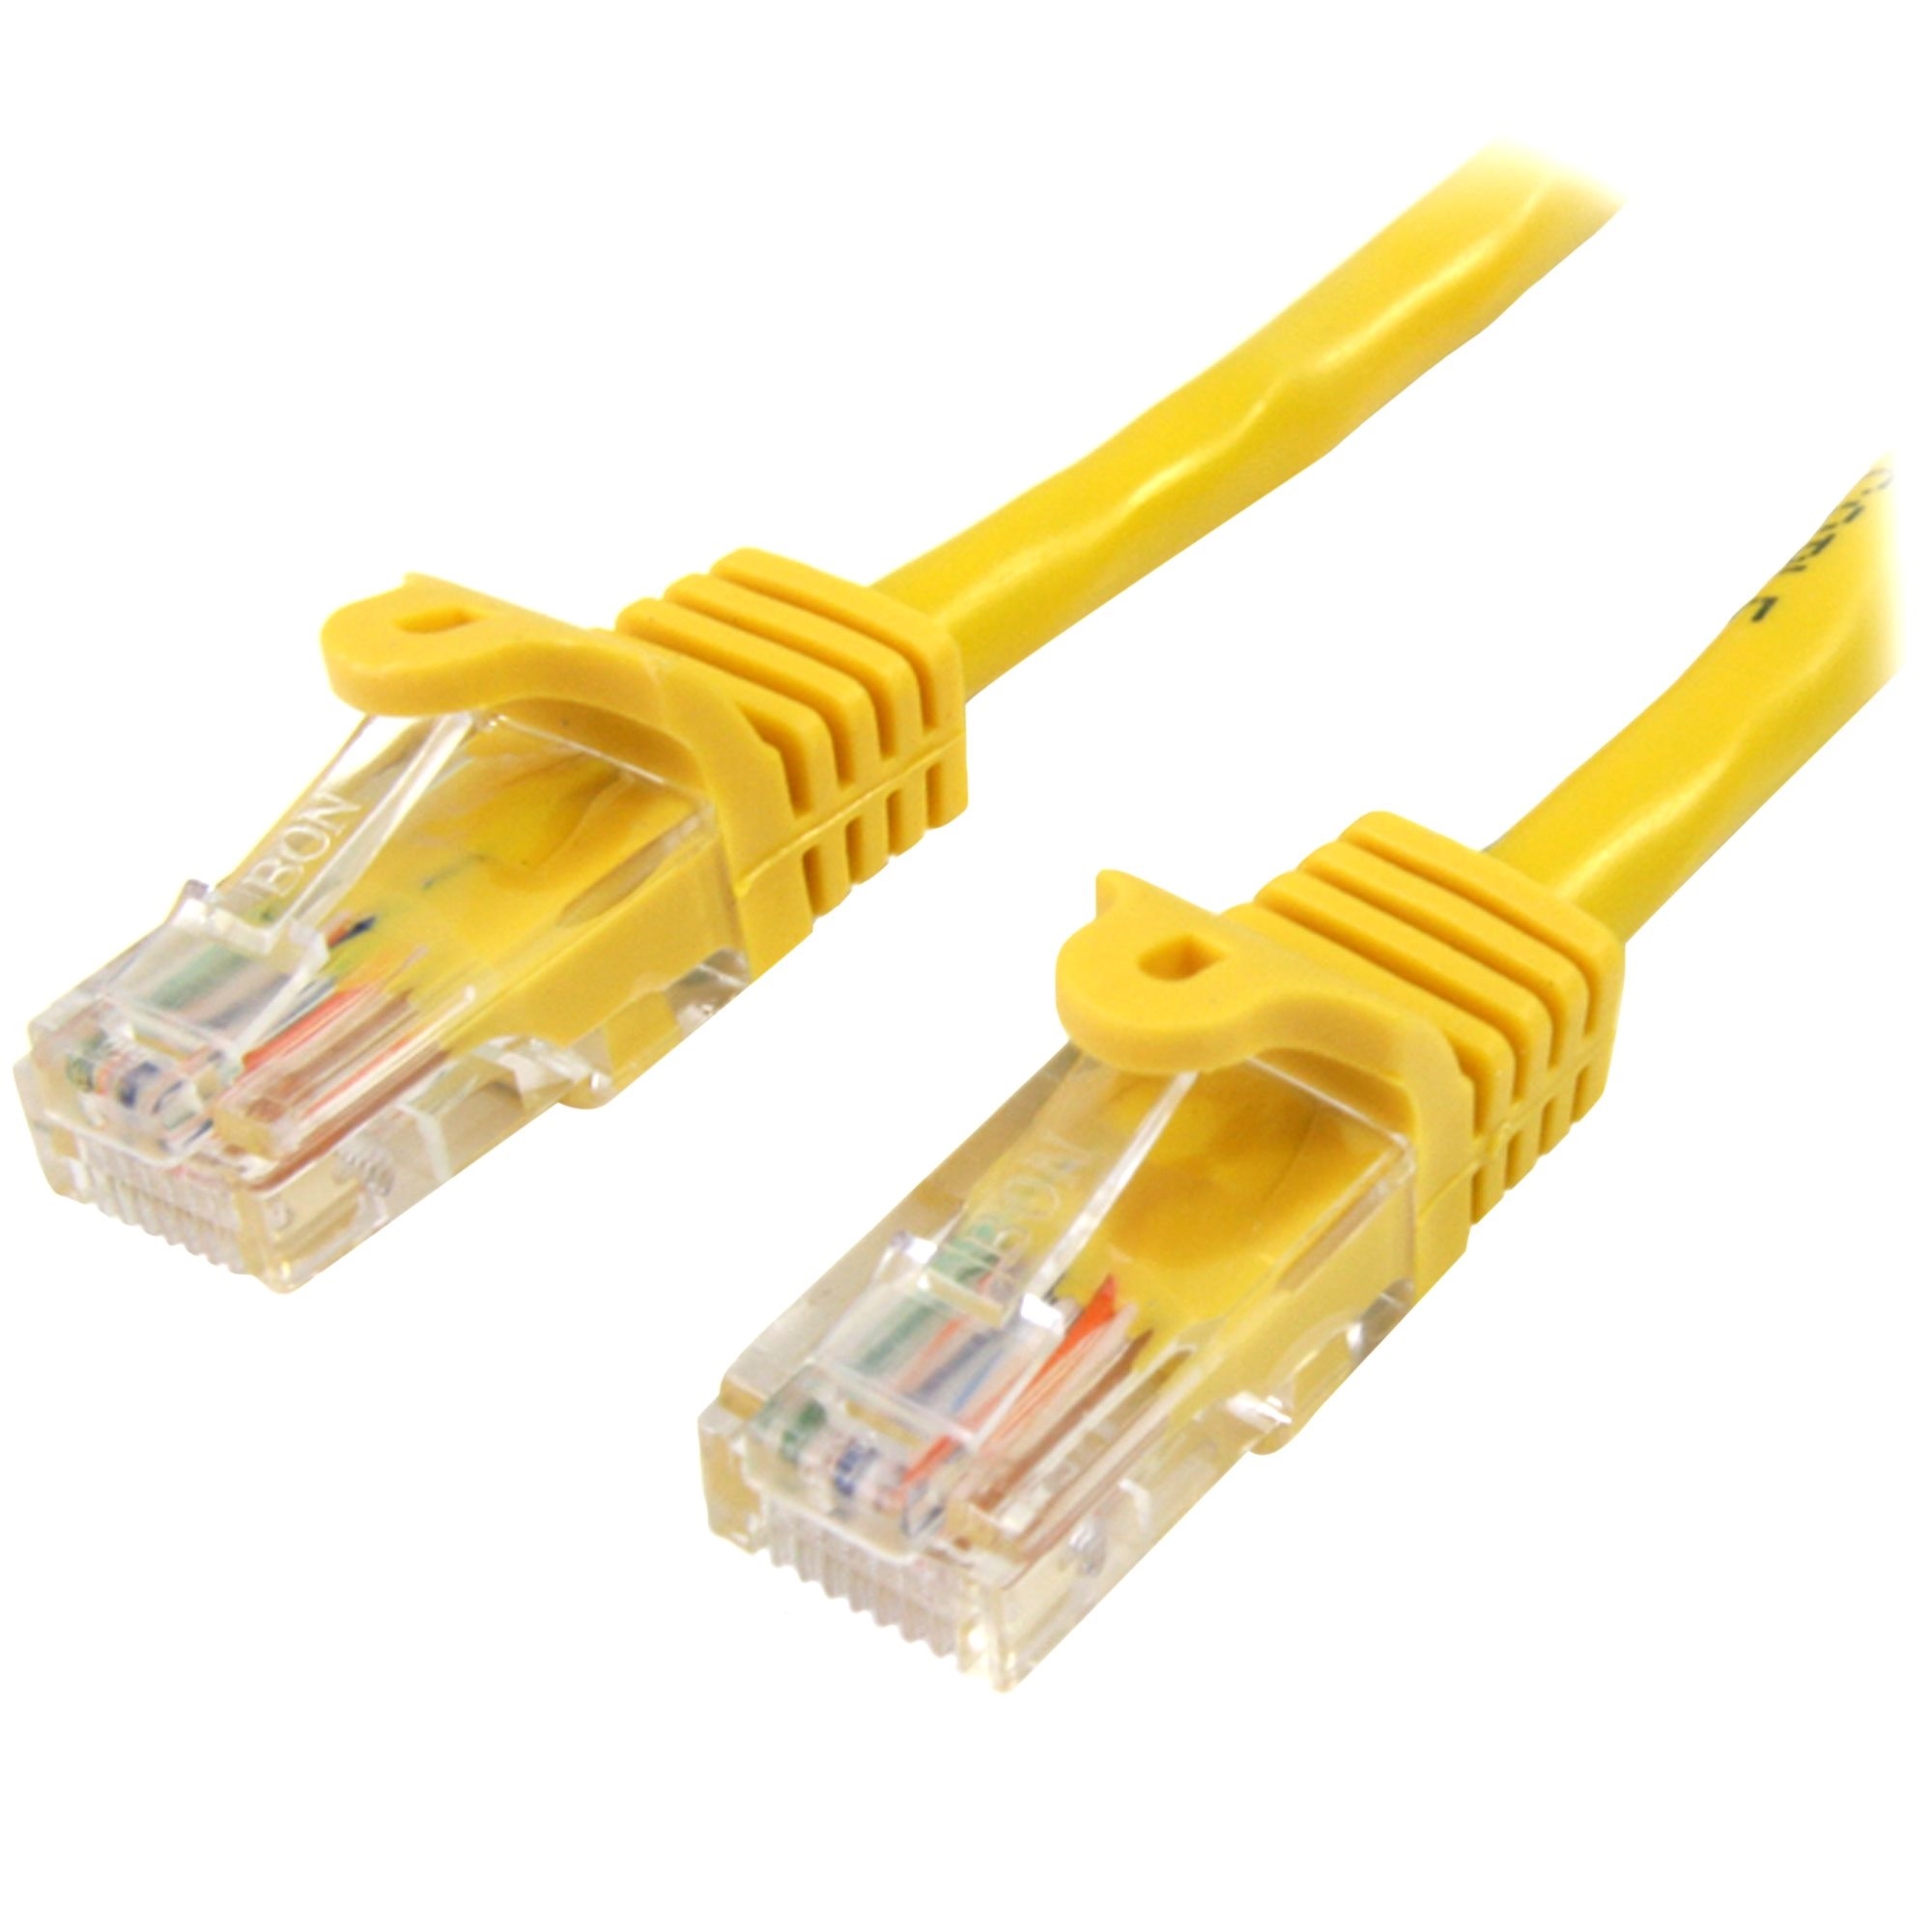 StarTech Snagless UTP Cat5e Patch Cable (Yellow, 1m)